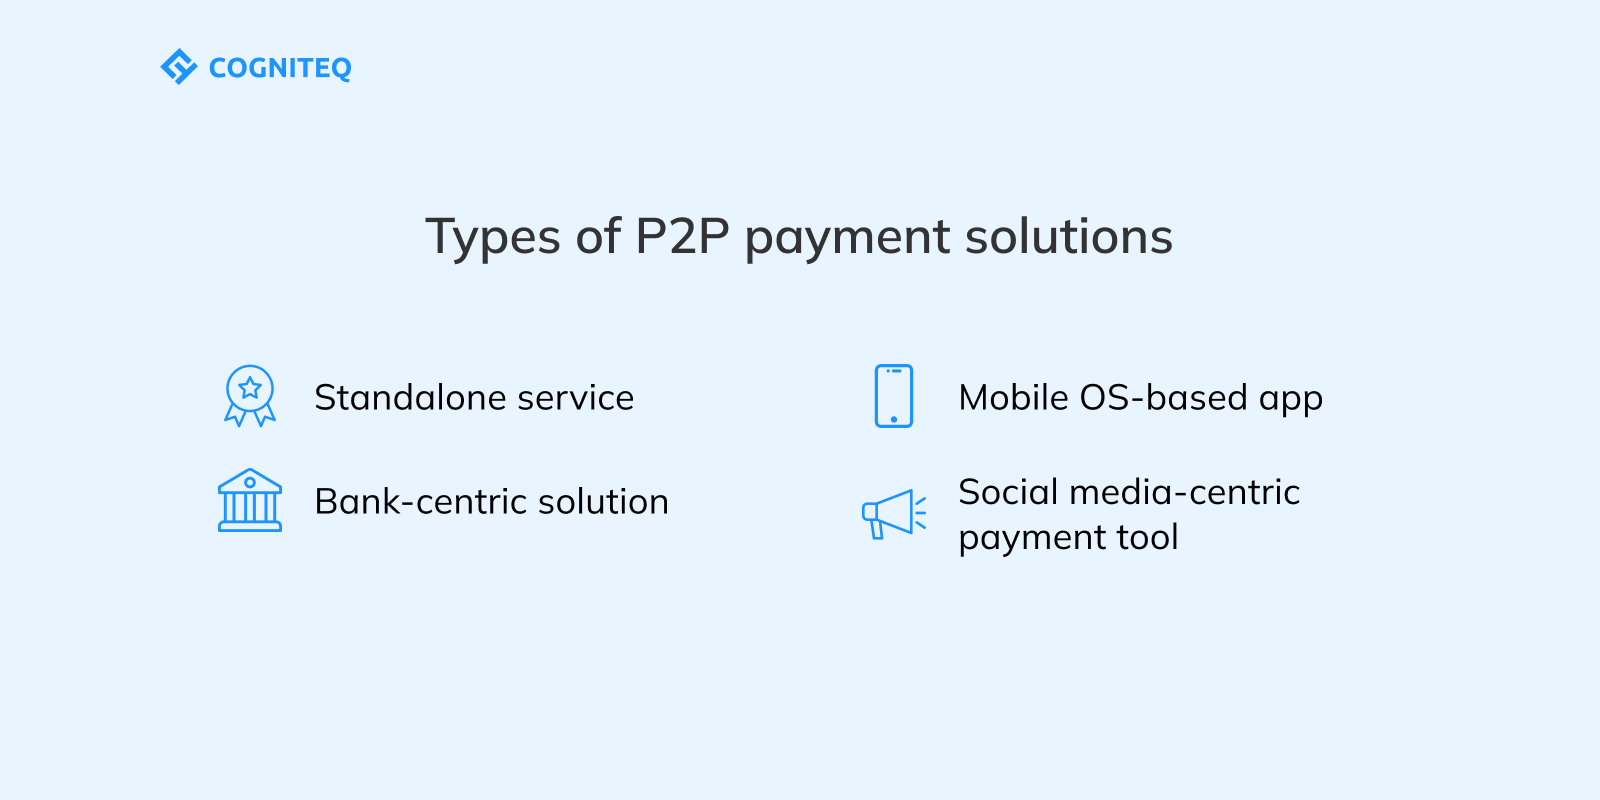 Types of P2P payment solutions